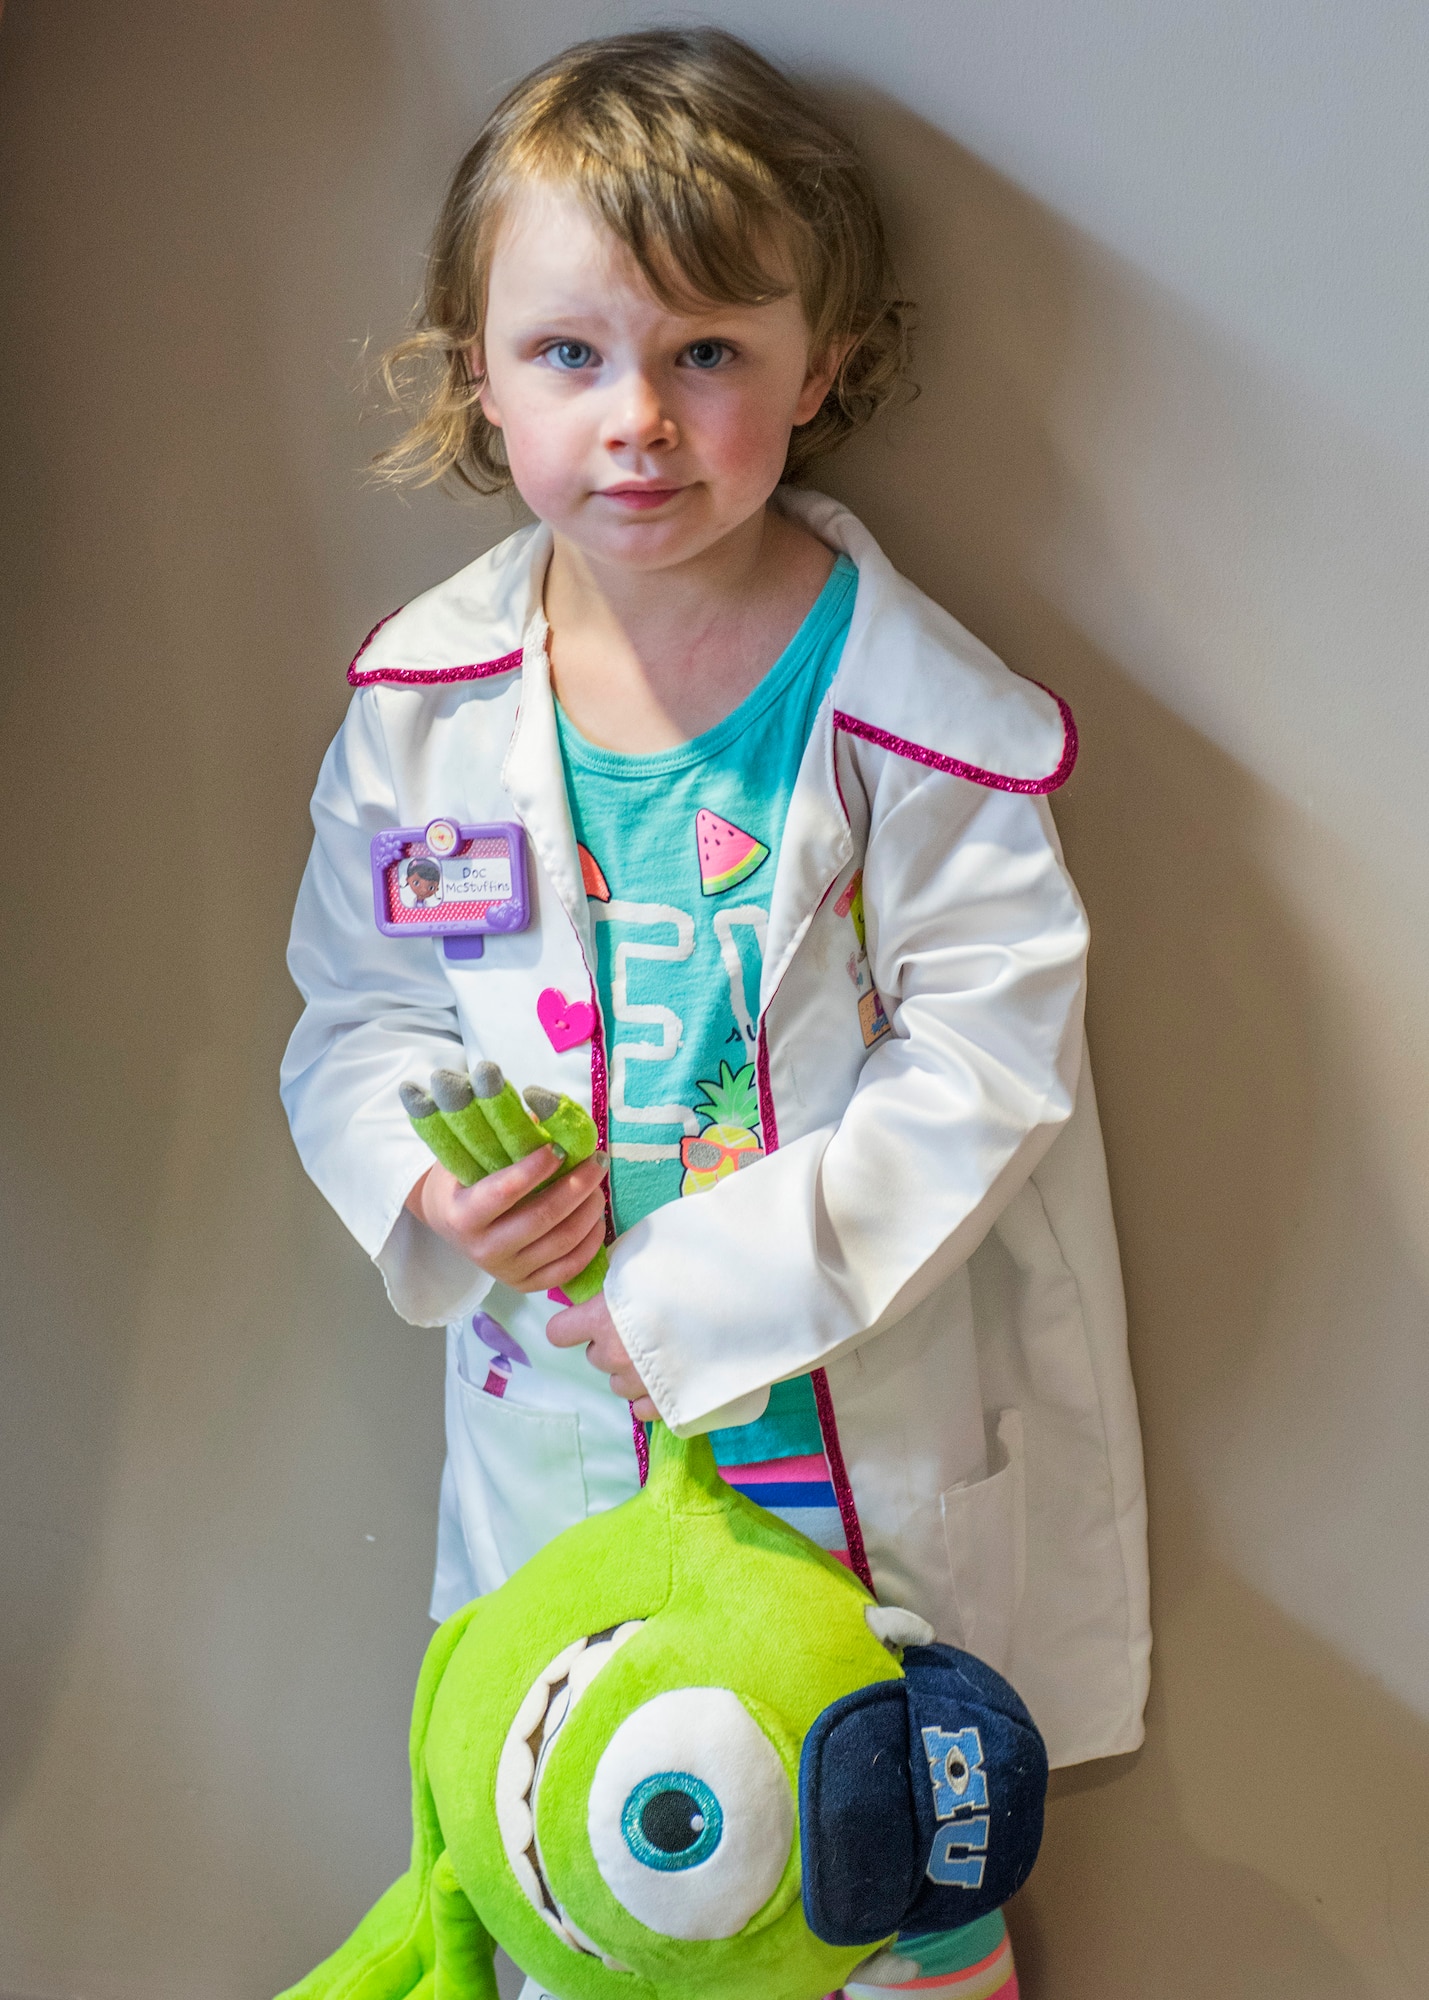 The 96th Medical Group's pediatric clinic hosted 127 children during their first Teddy Bear Clinic to educate them about hospital procedures and to demonstrate what they may expect if they need to see a doctor.